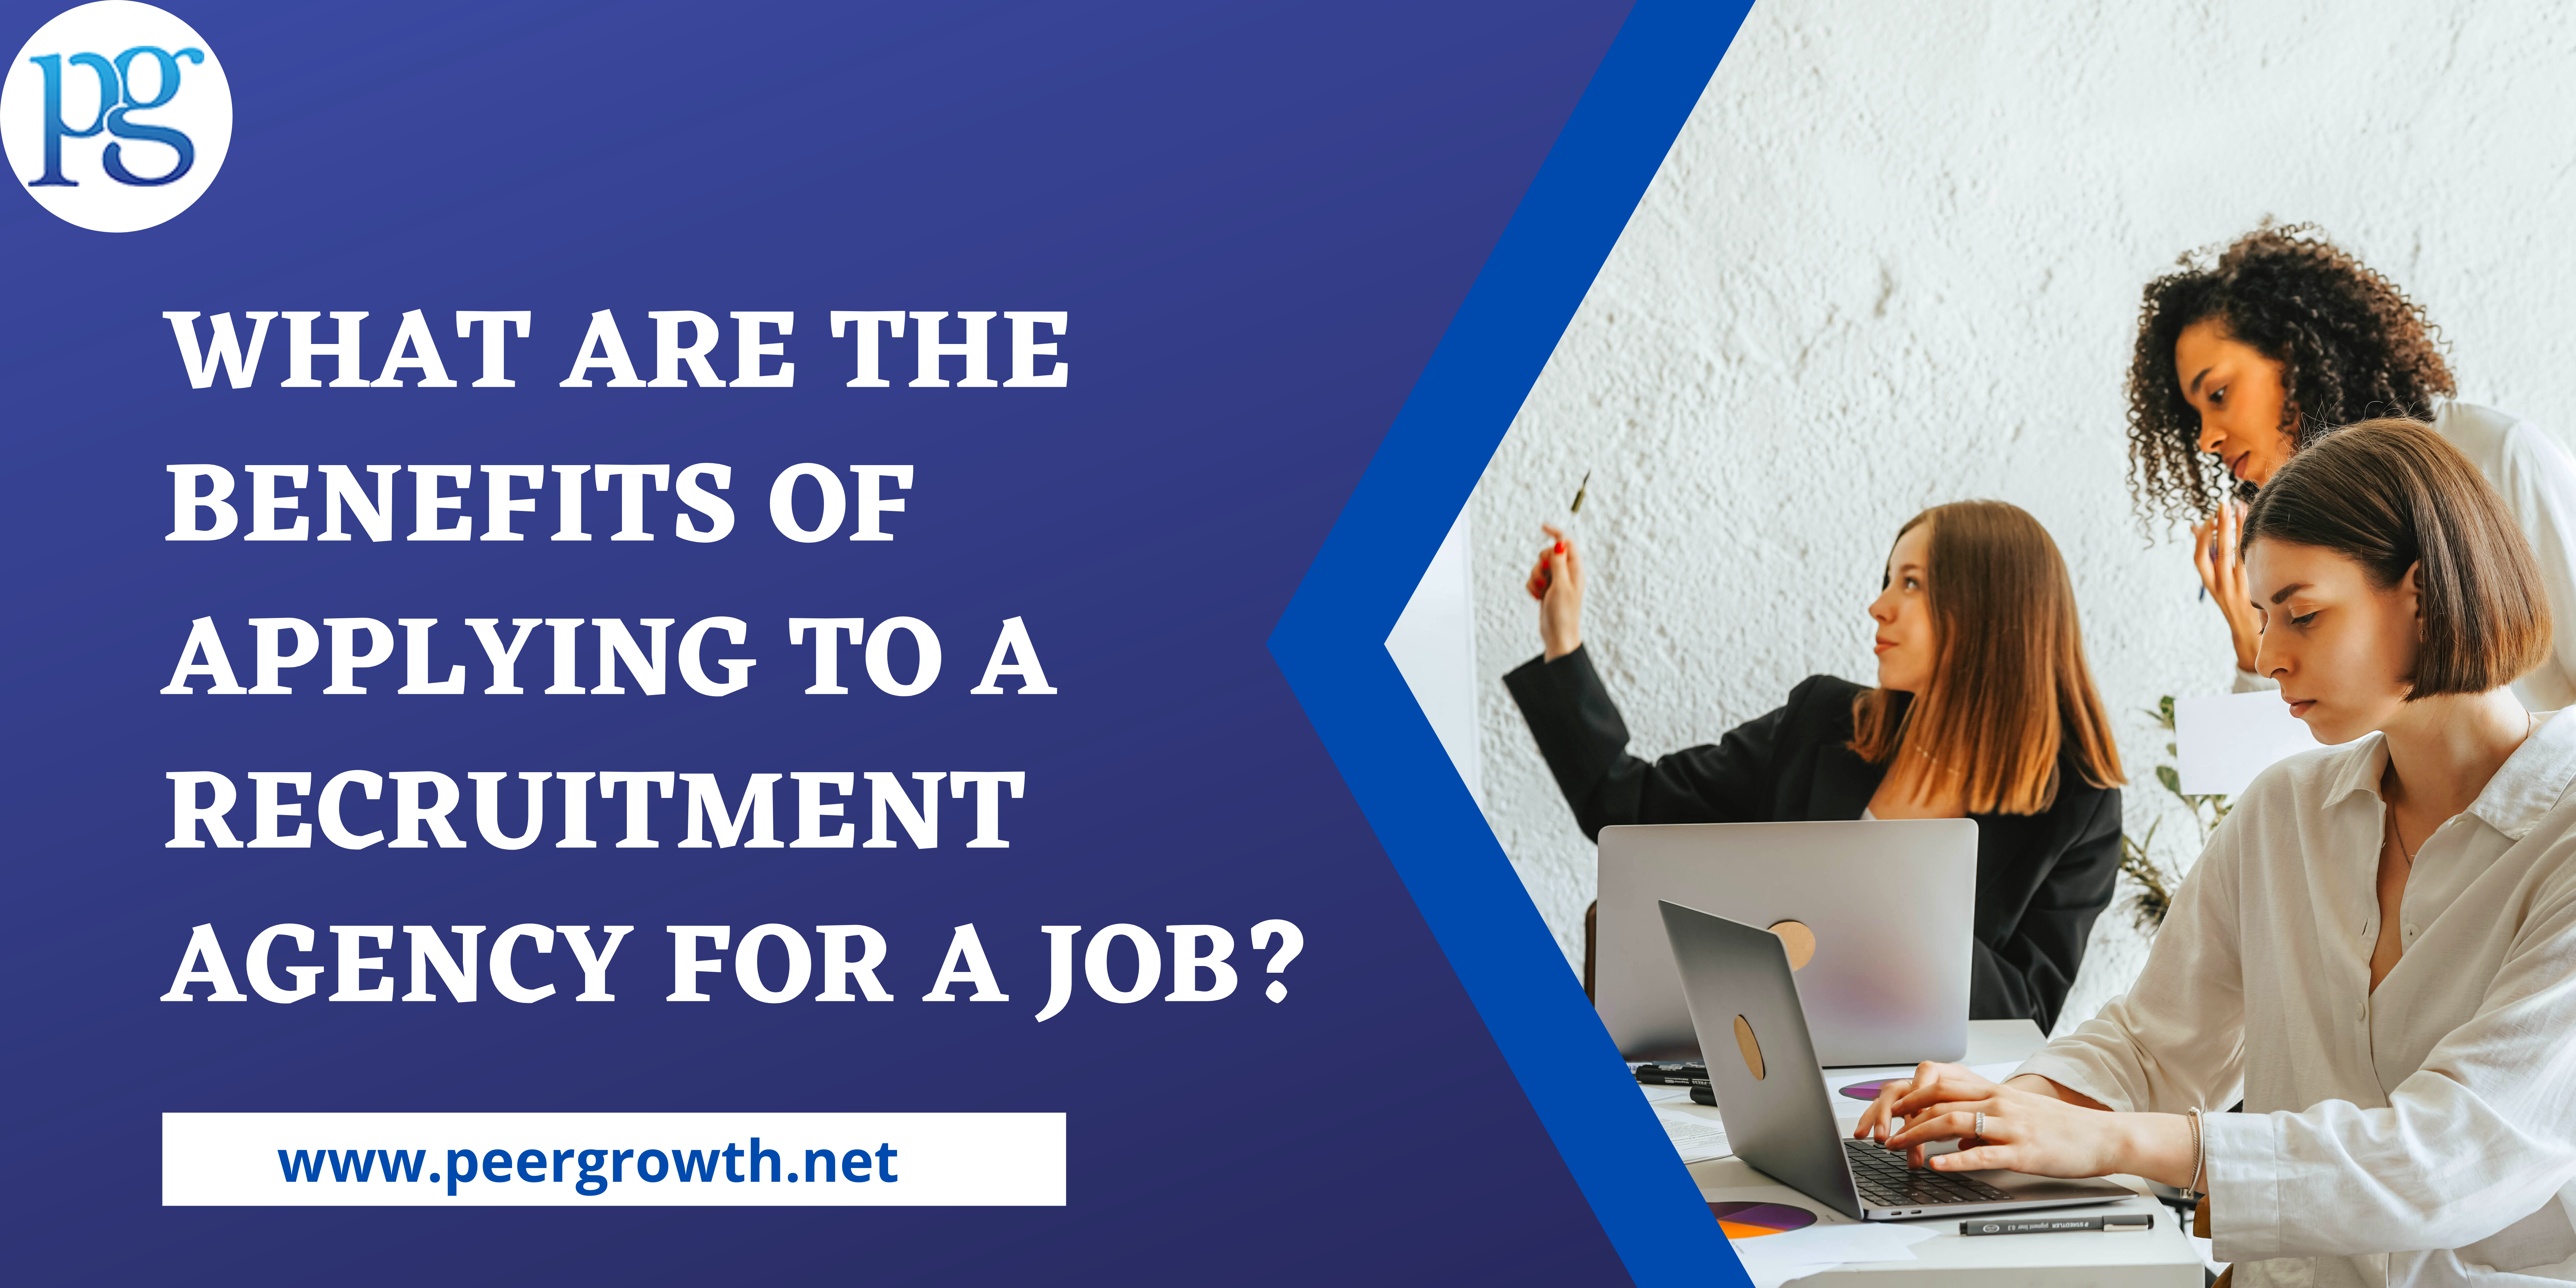 What are the benefits of applying to a recruitment agency for a job